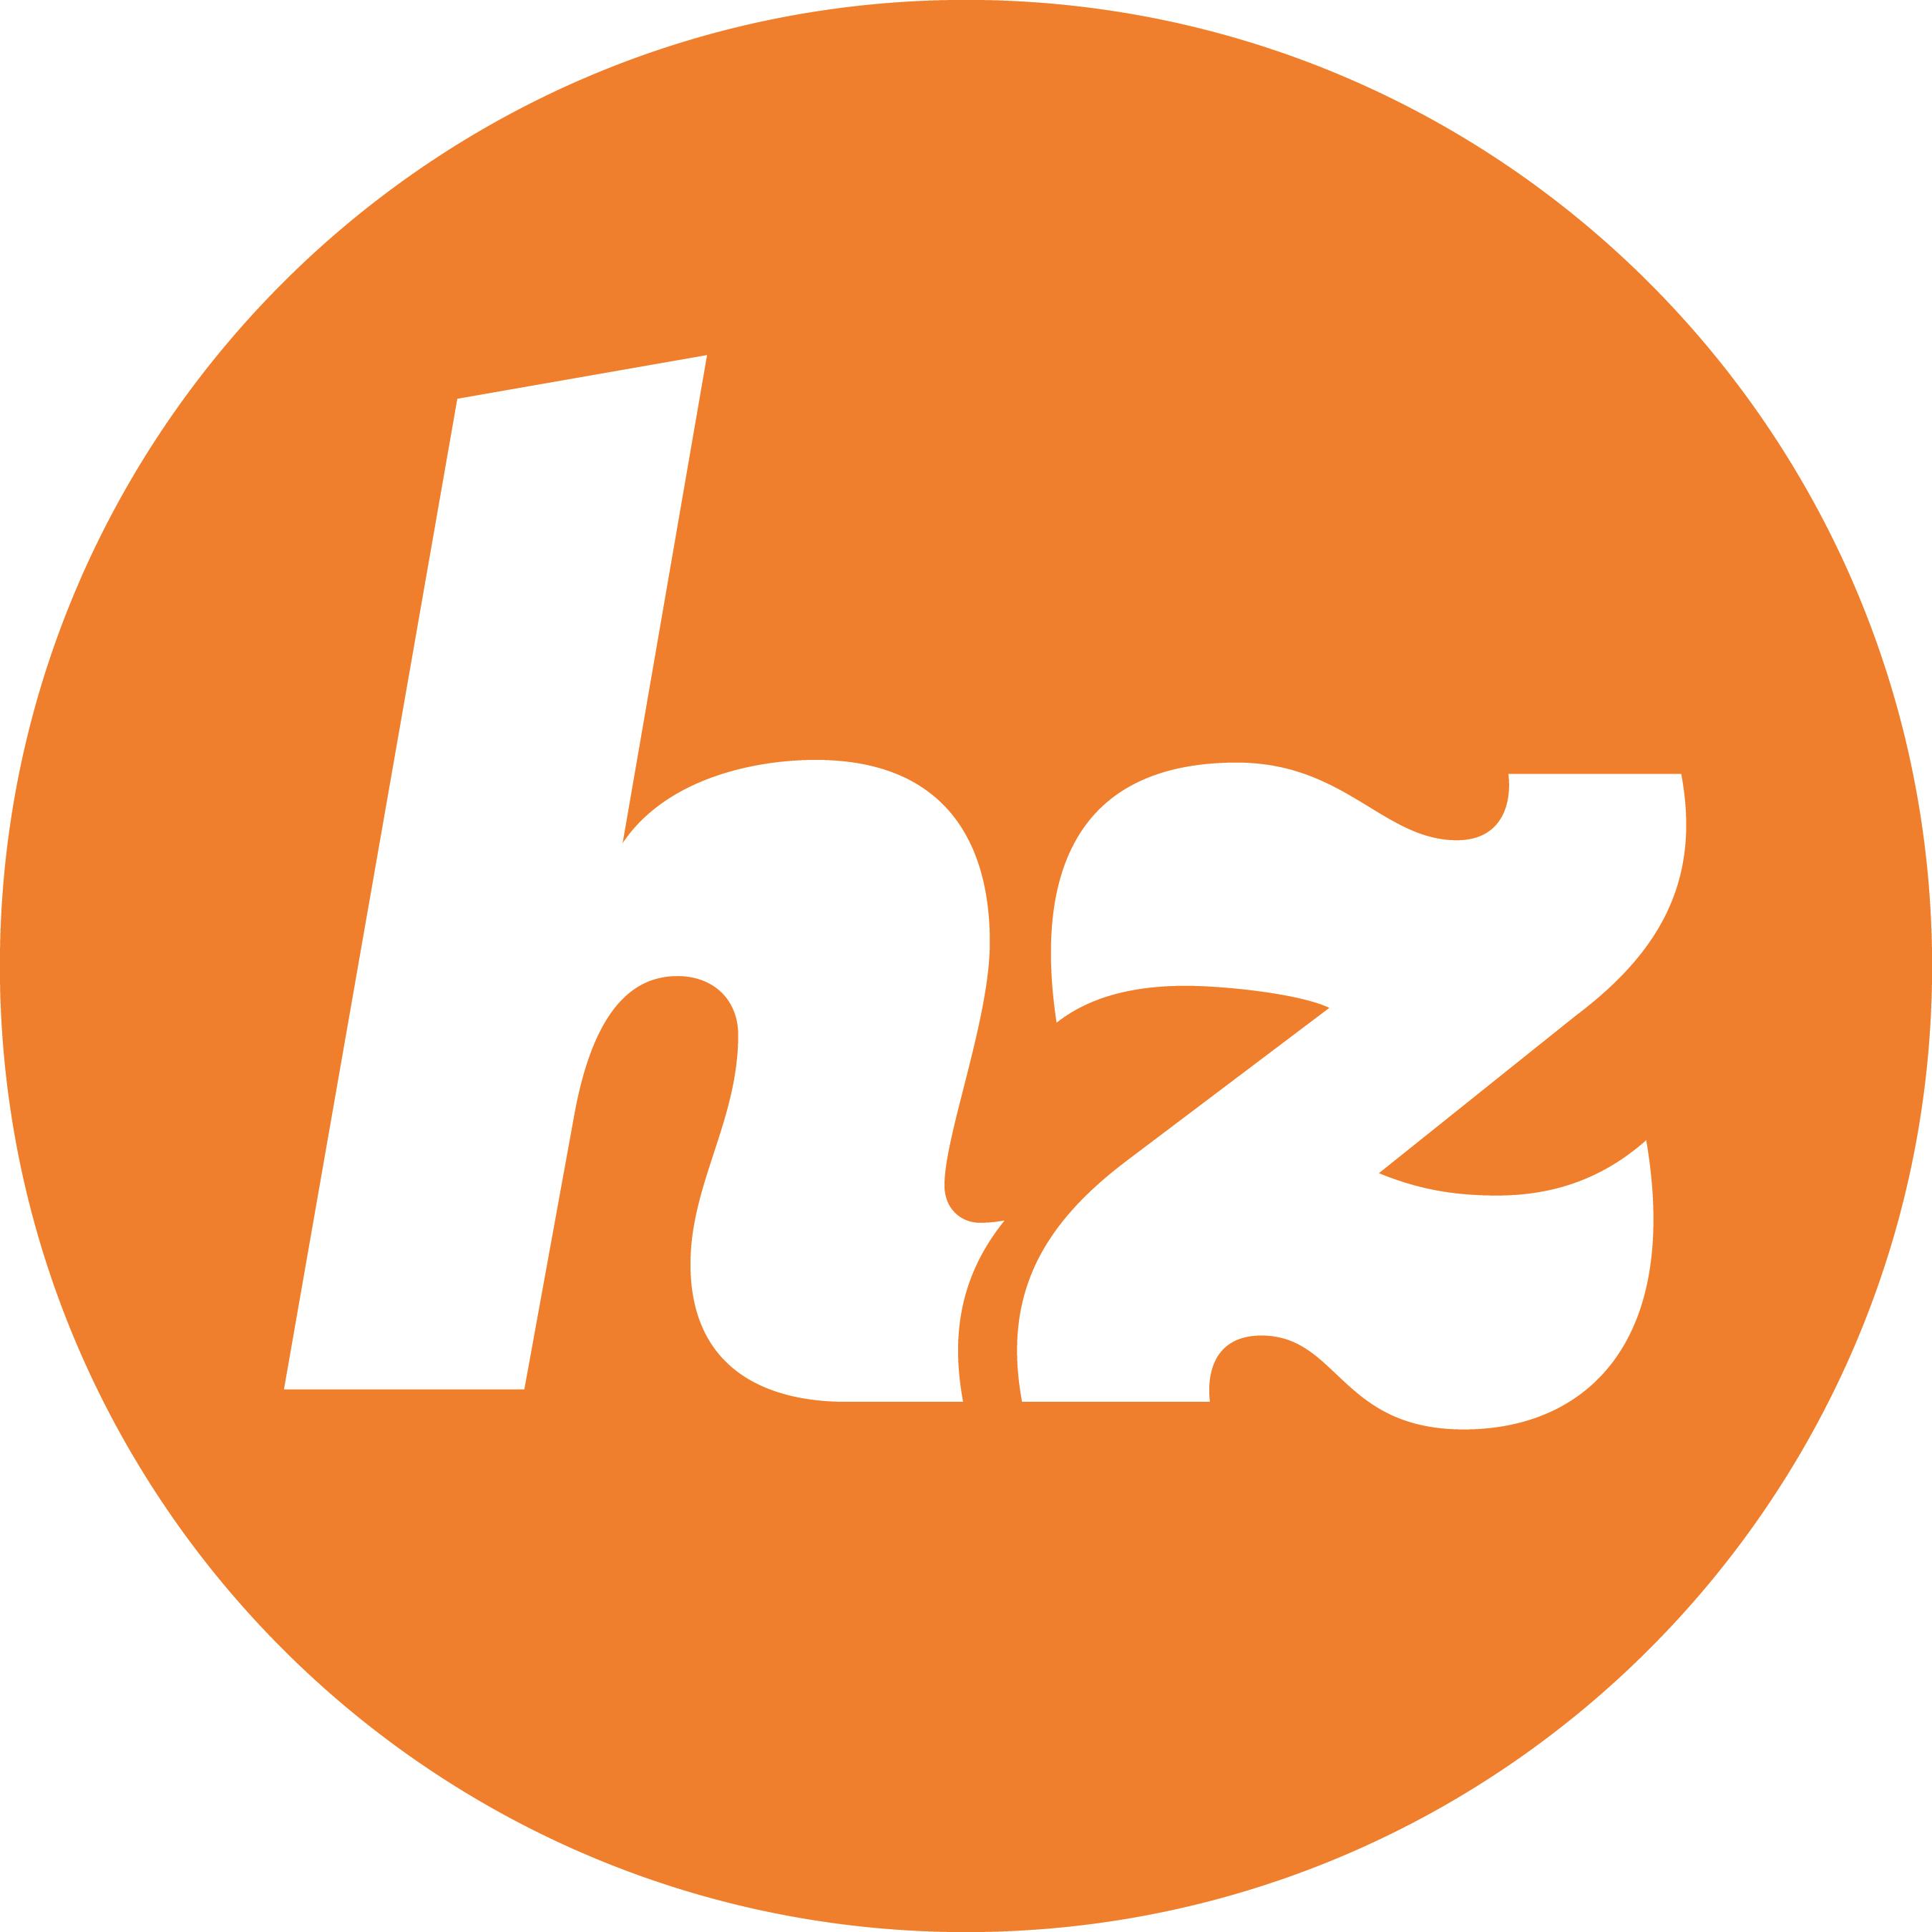 HZ, a division of BCW